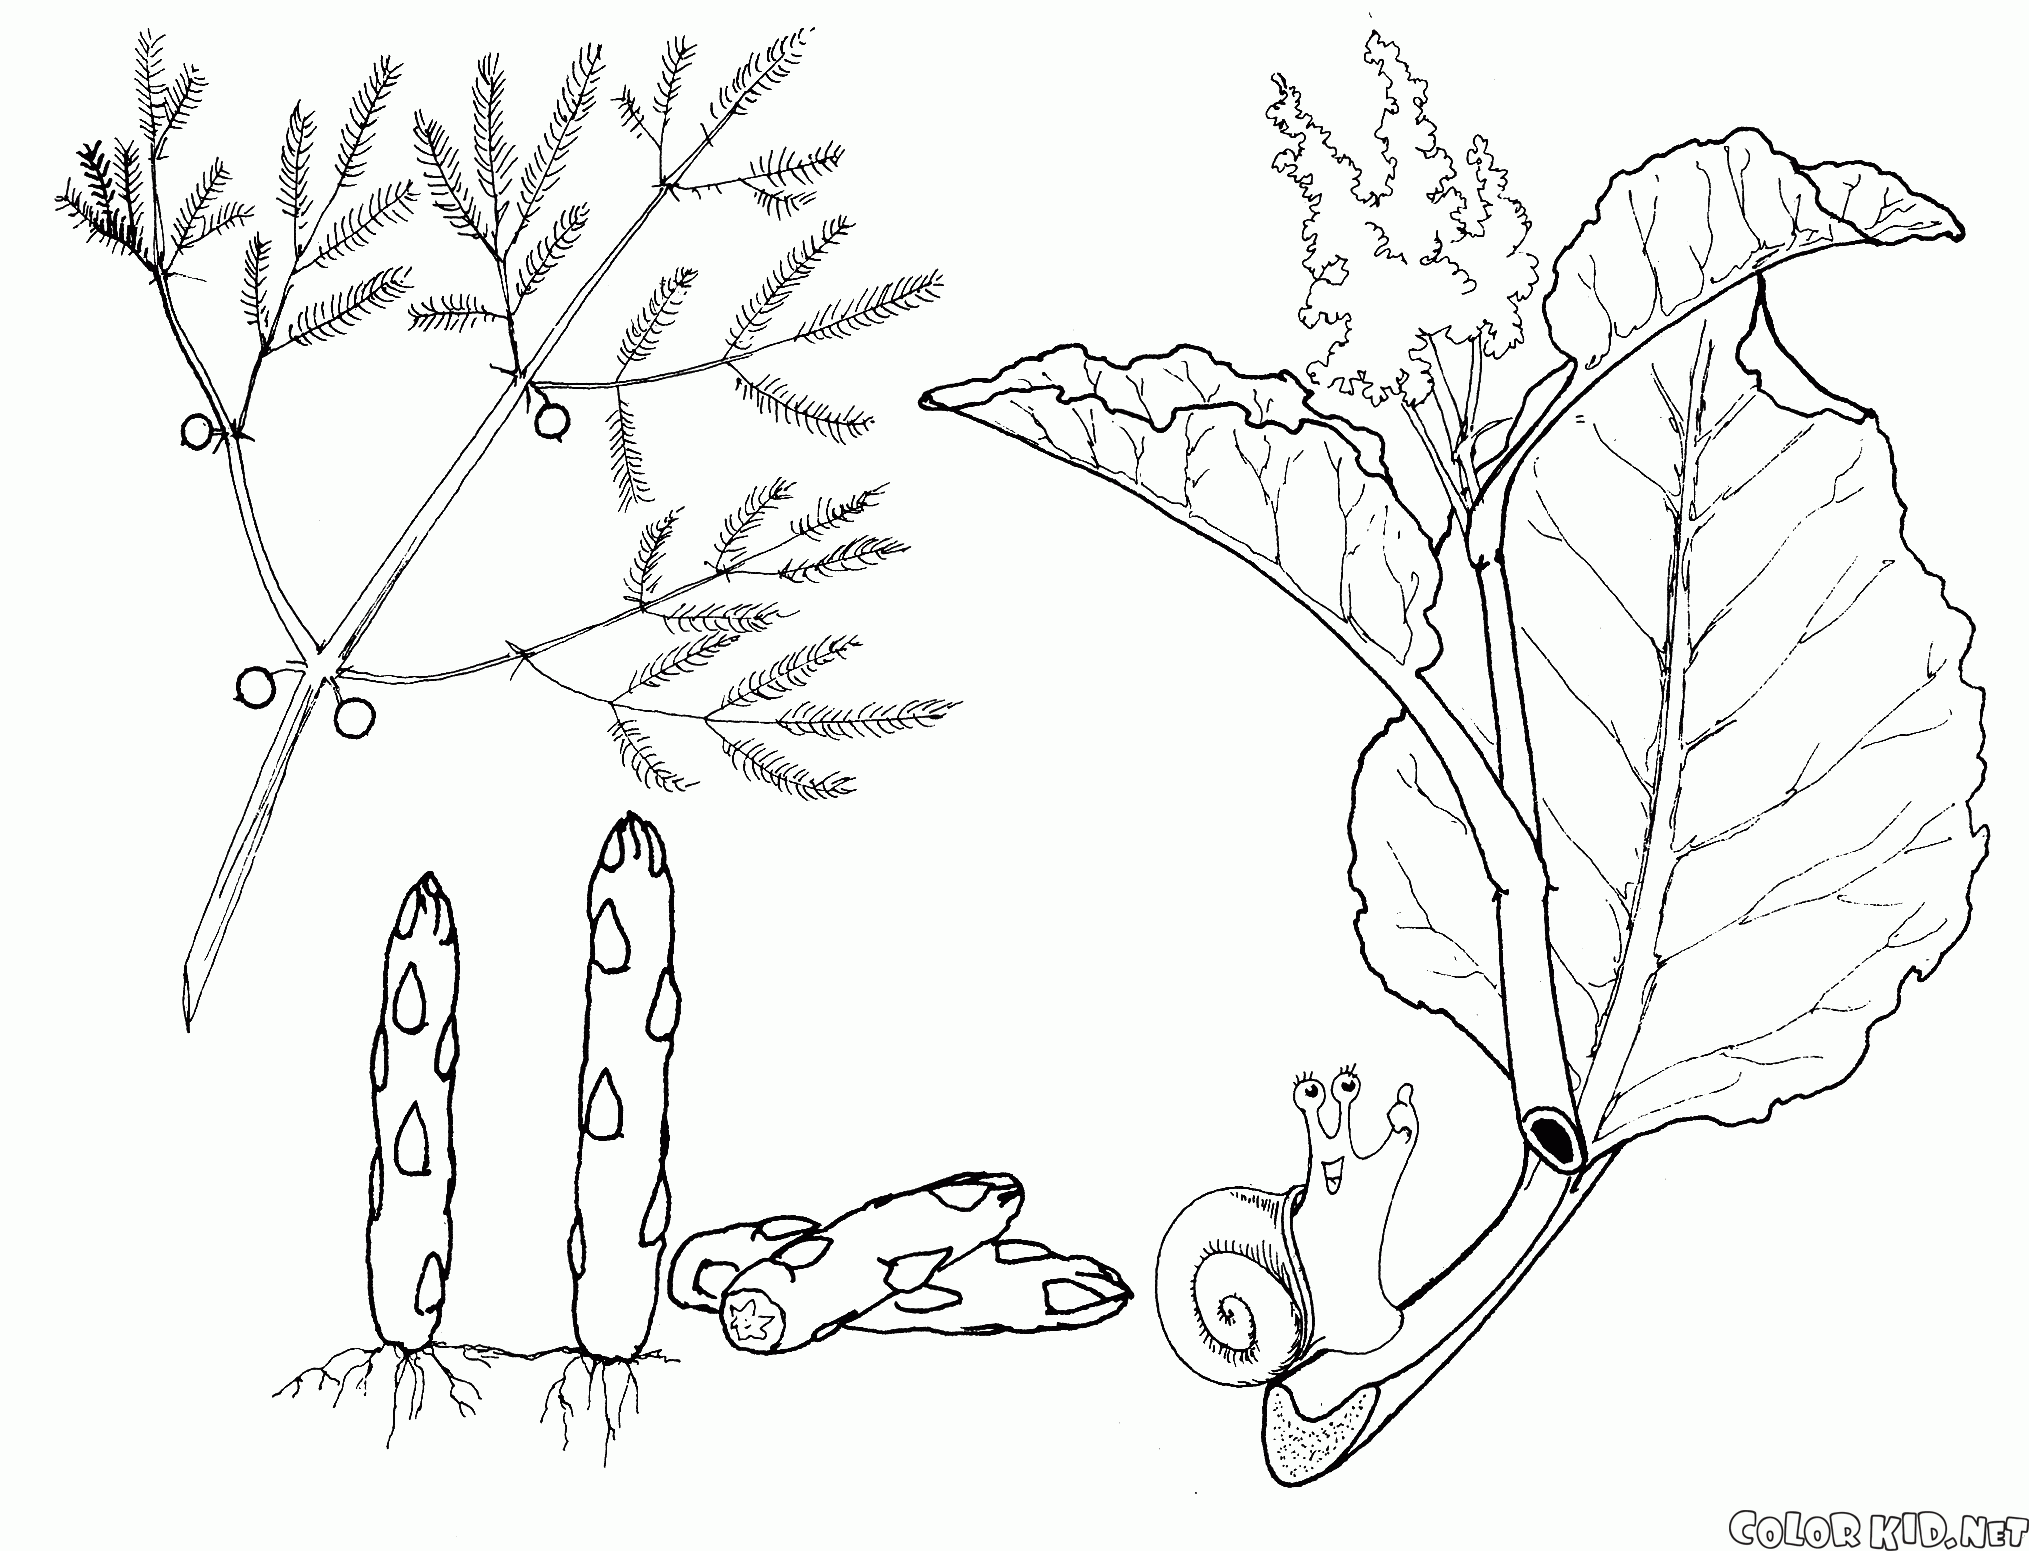 Coloring page - Vegetables